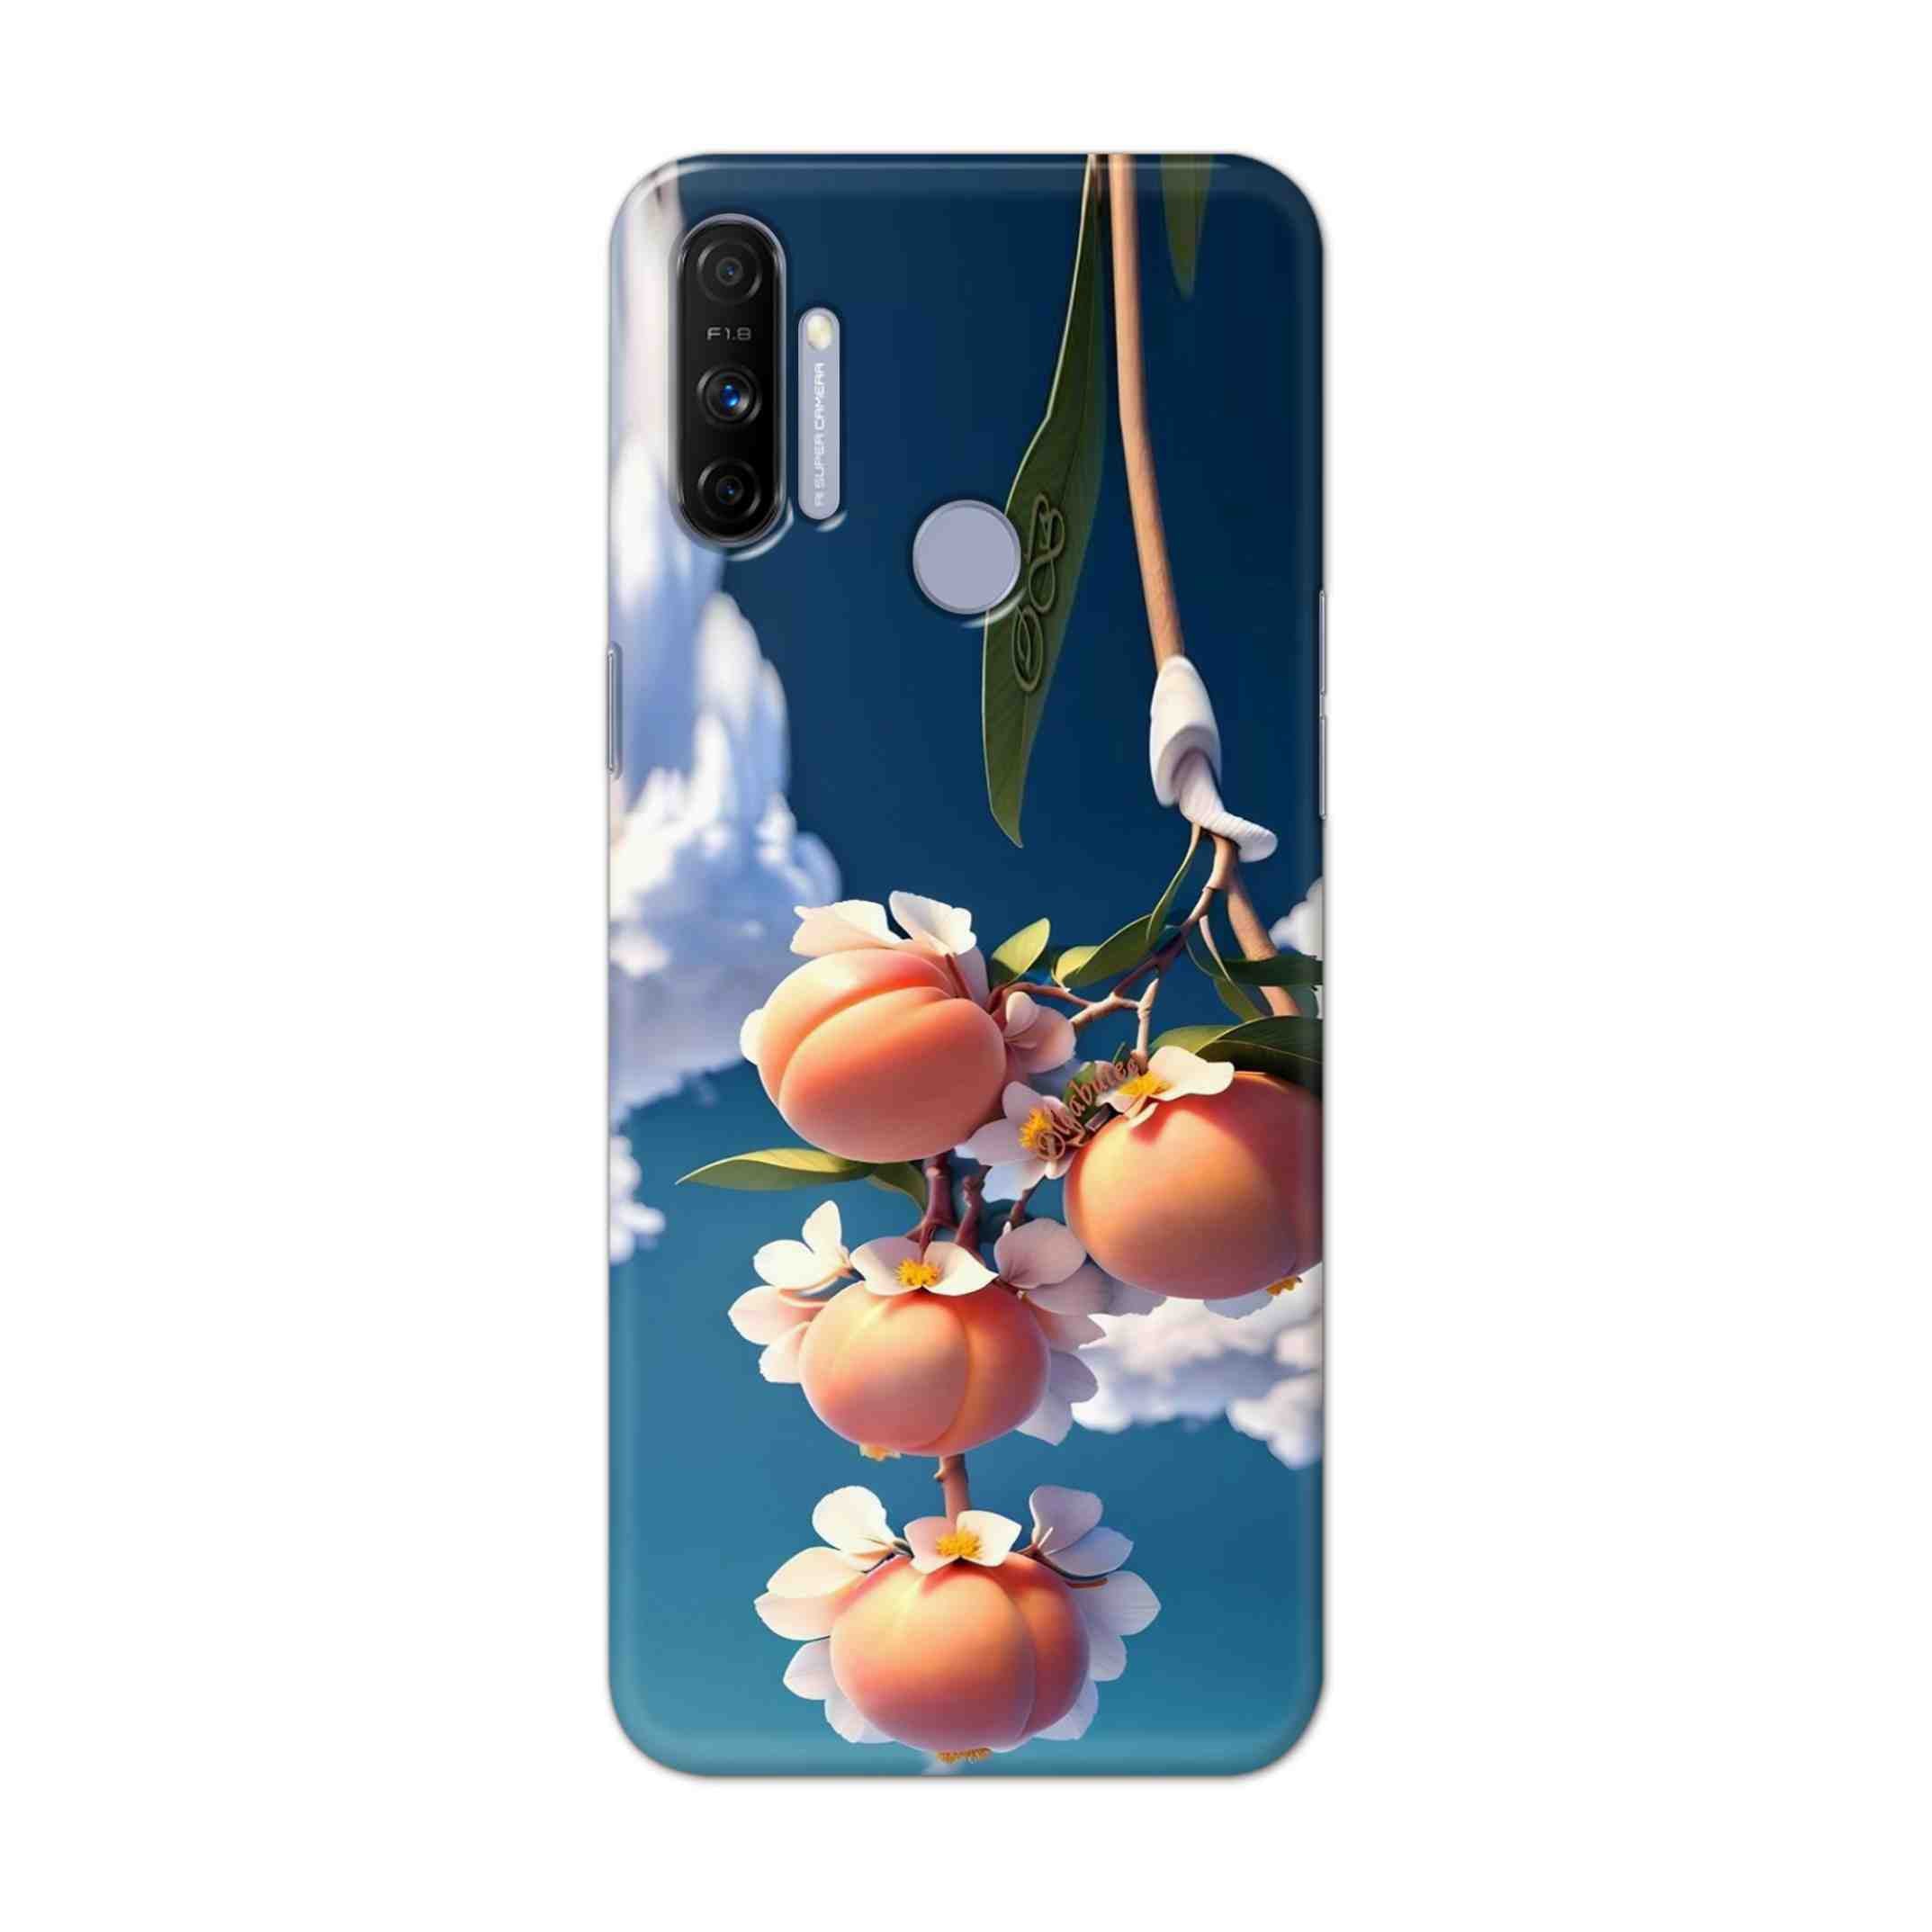 Buy Fruit Hard Back Mobile Phone Case Cover For Realme Narzo 20A Online